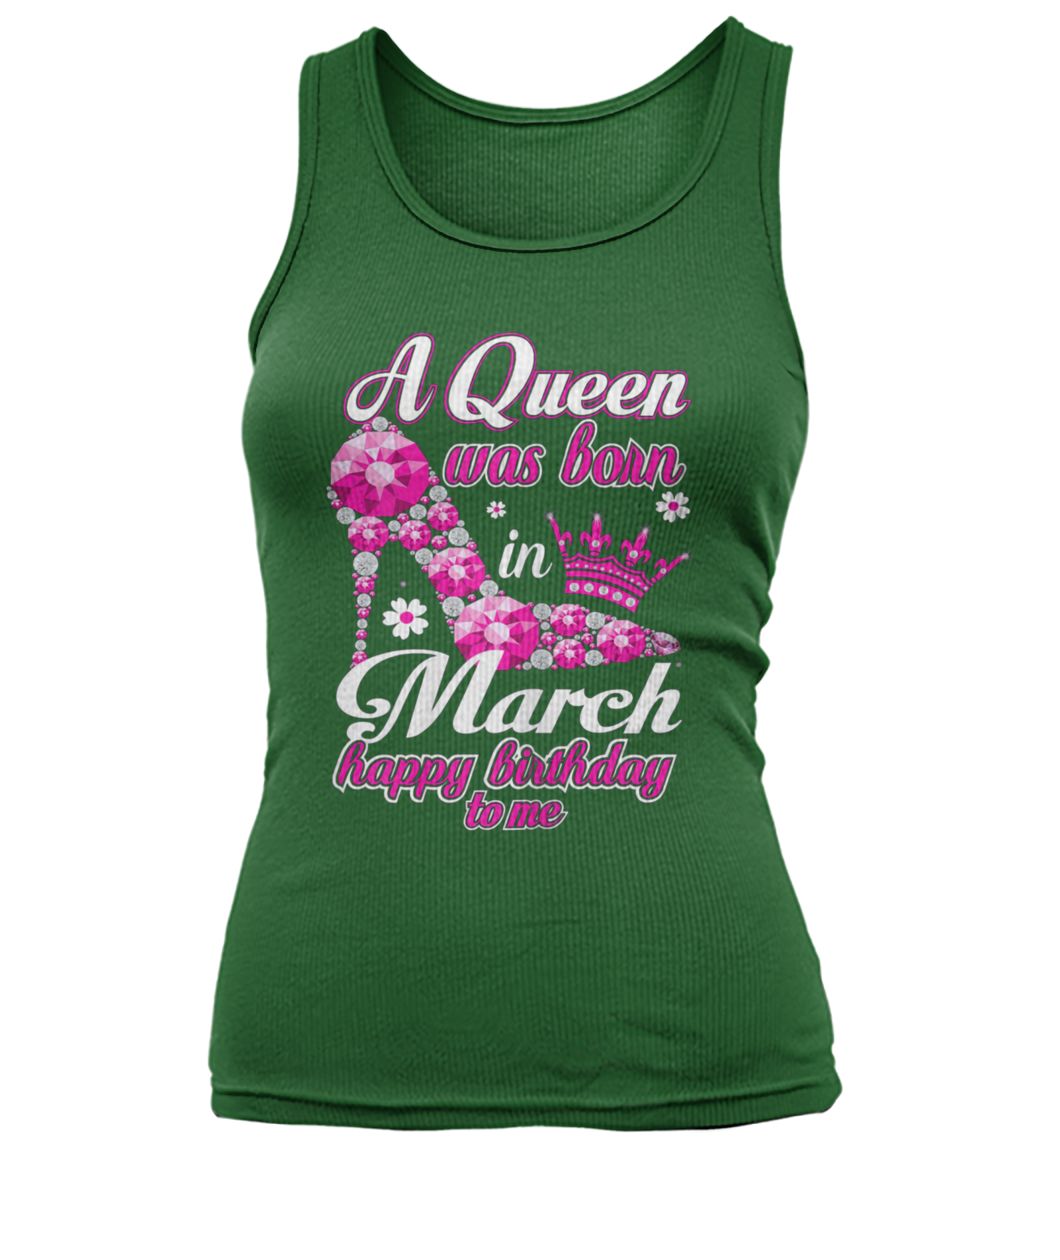 A queen was born in march happy birthday to me women's tank top